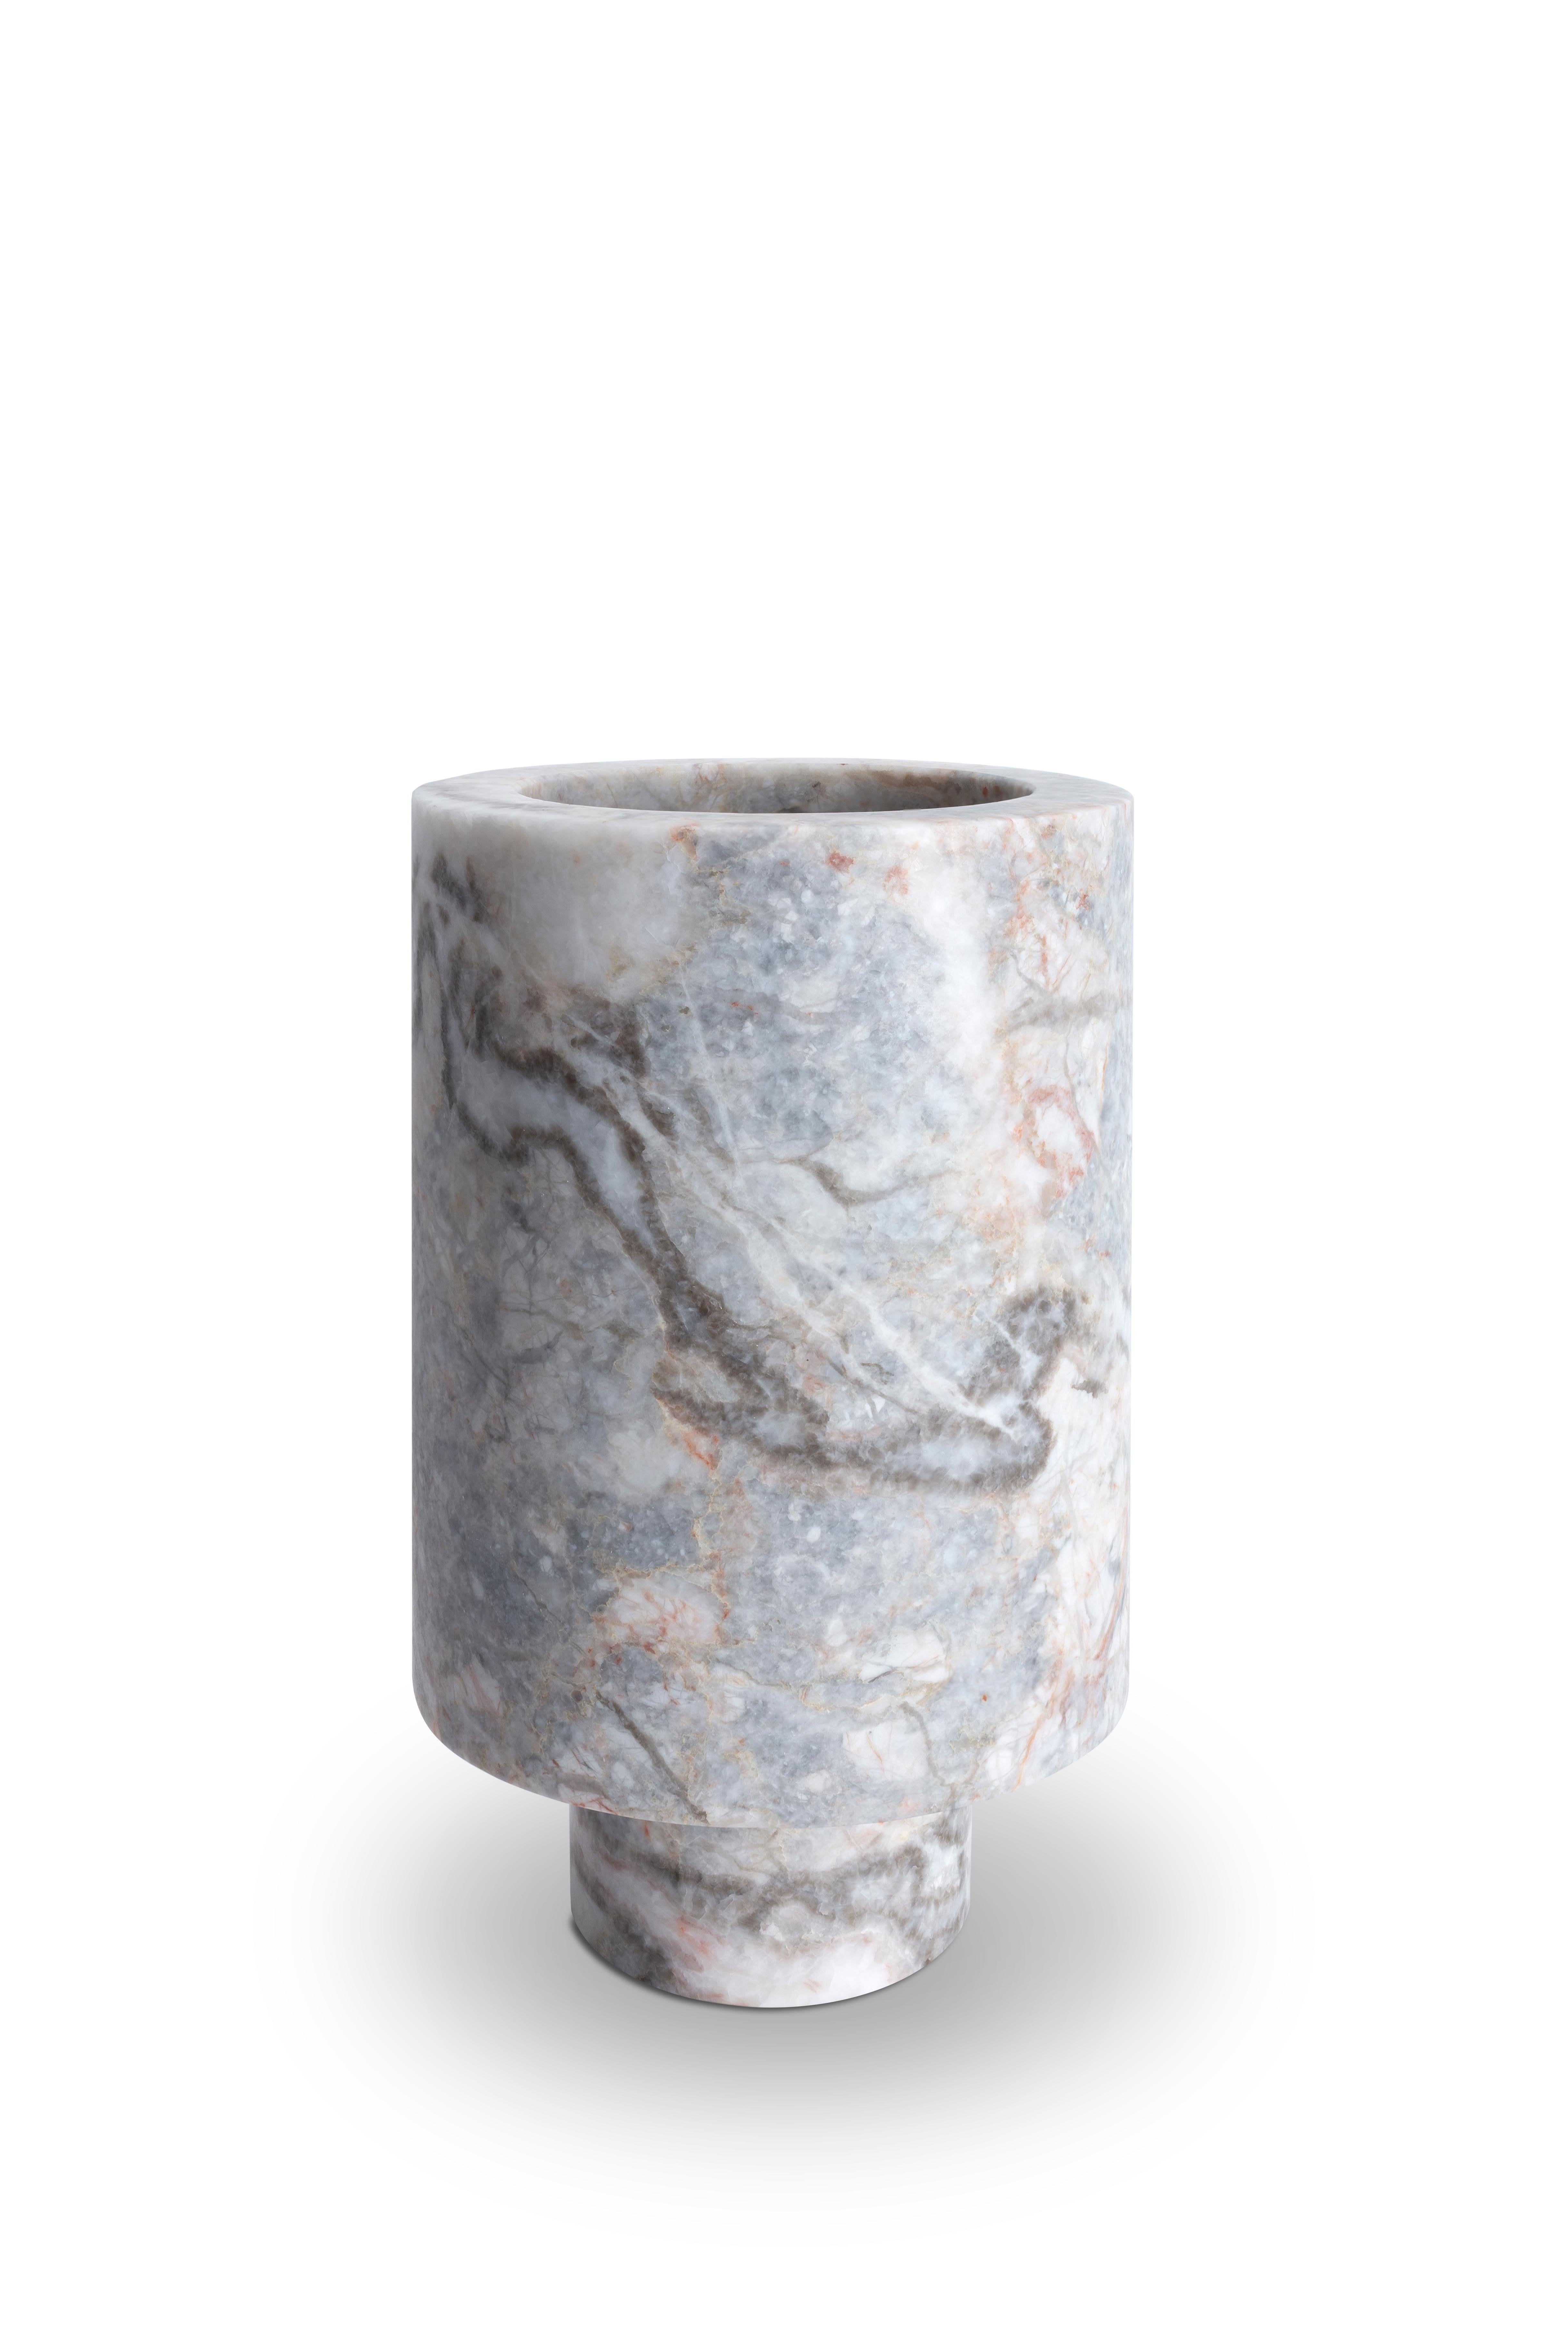 Marble Inside Out Vase by Karen Chekerdjian
Dimensions: Ø 14 x H 24 cm.
Materials: Marble.

Handmade in Italy. Also available in different marble options. Please contact us. 

Karen’s trajectory into designing was unsystematic, comprised of a